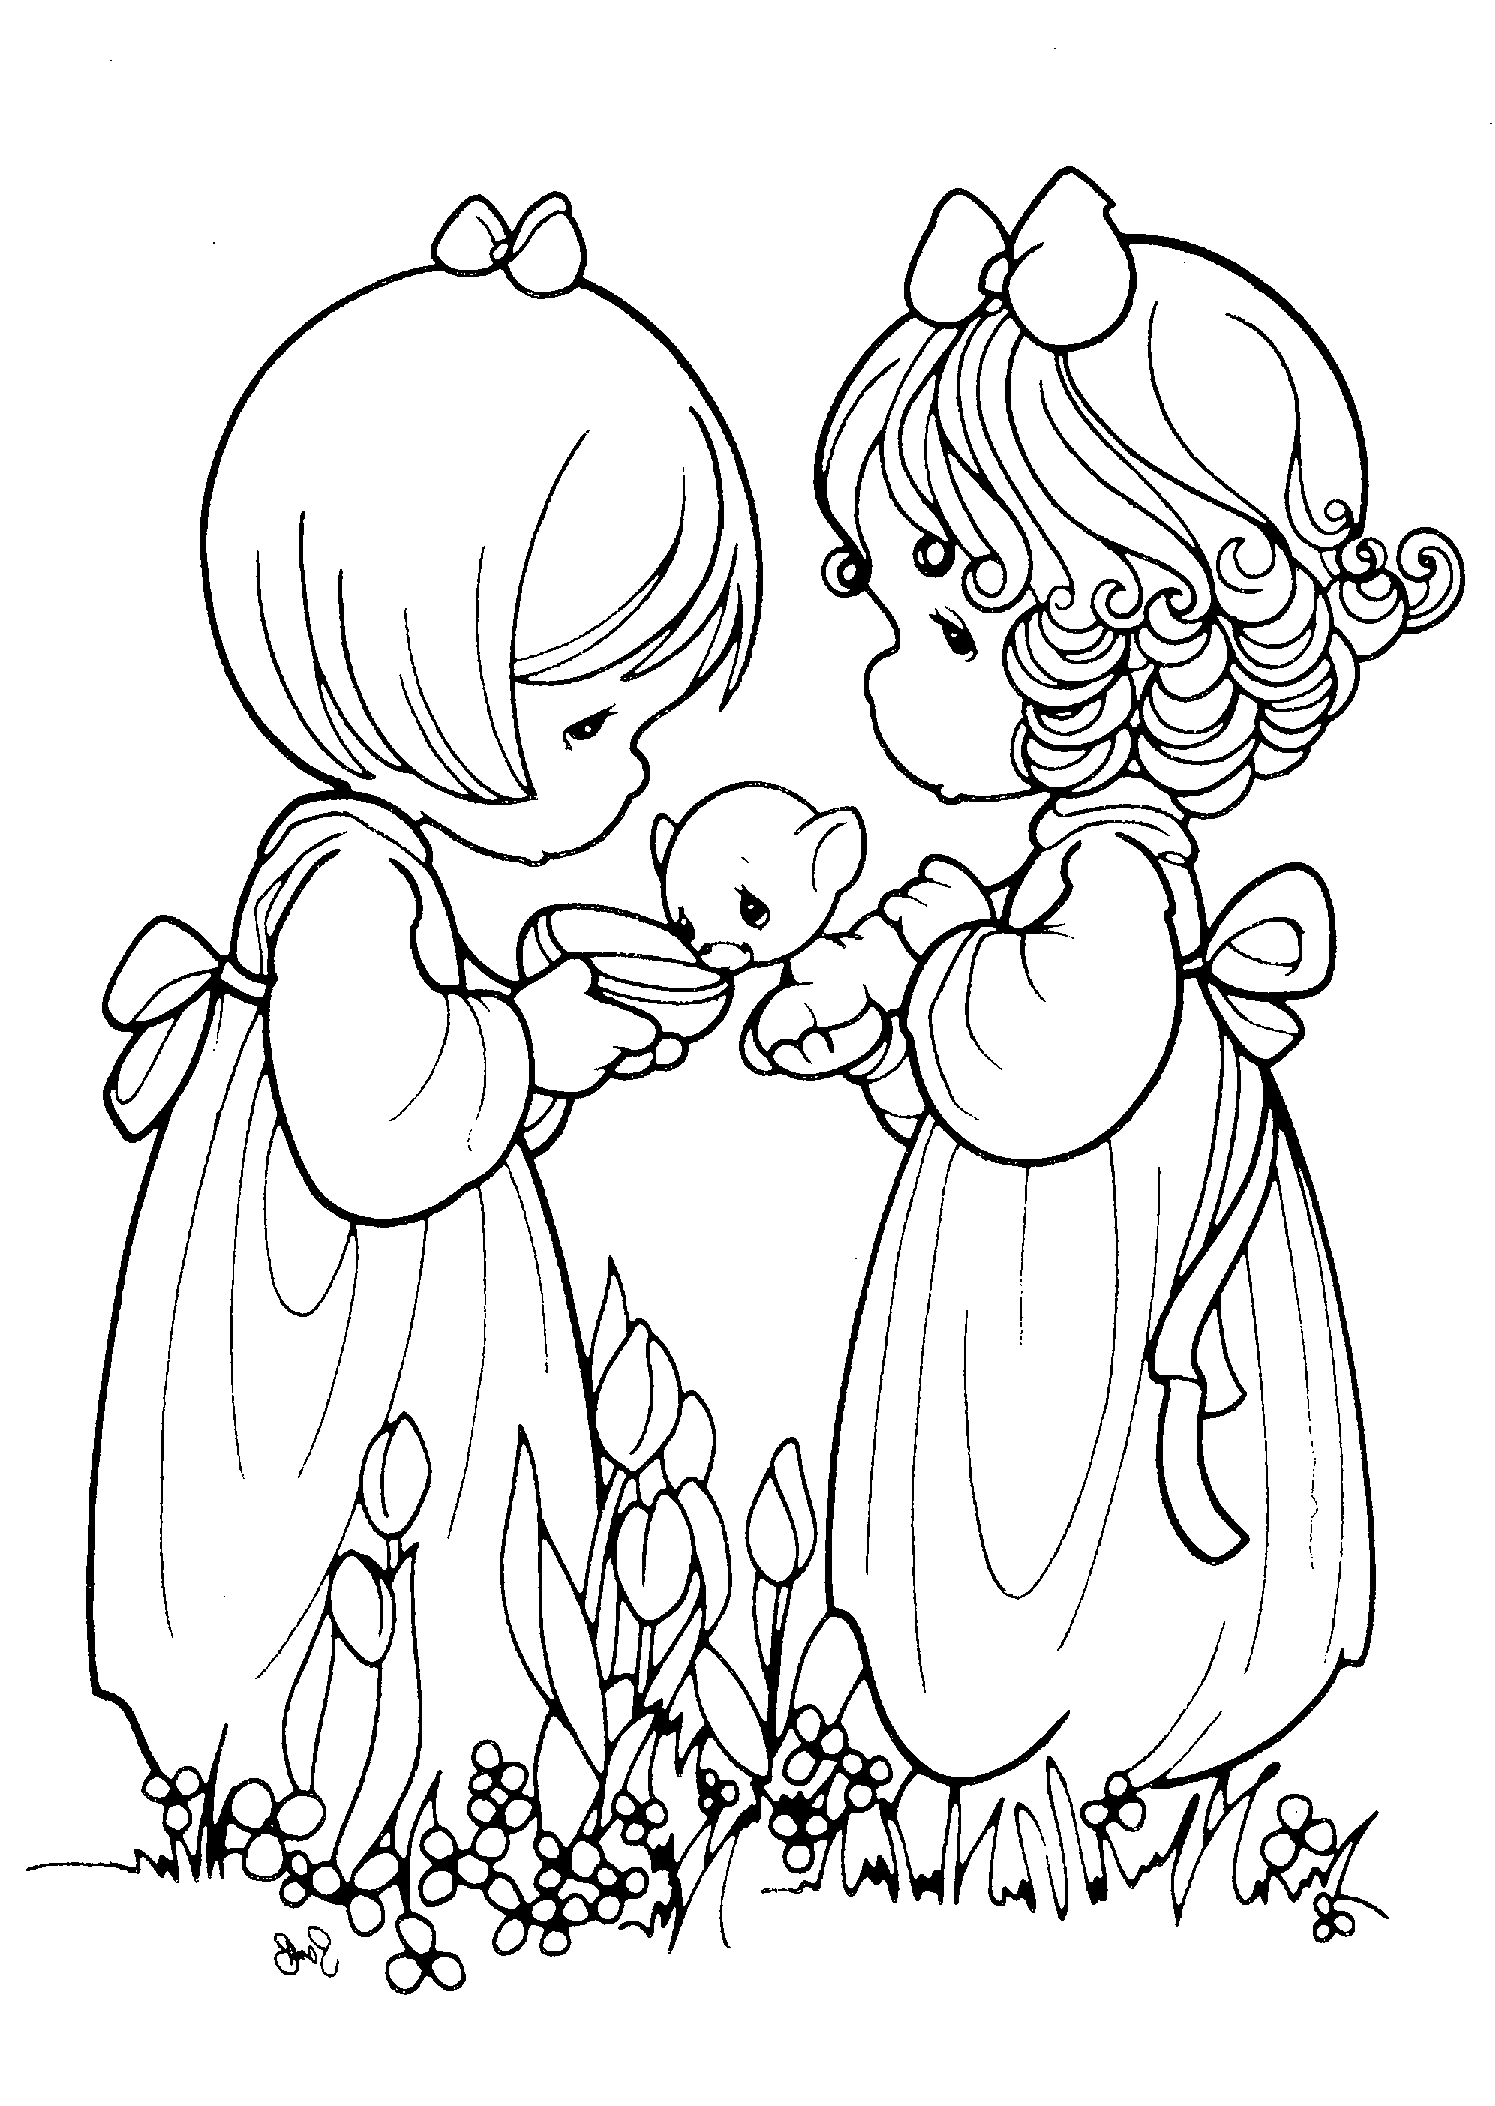 Precious Moments Animal Coloring Pages - Coloring Home